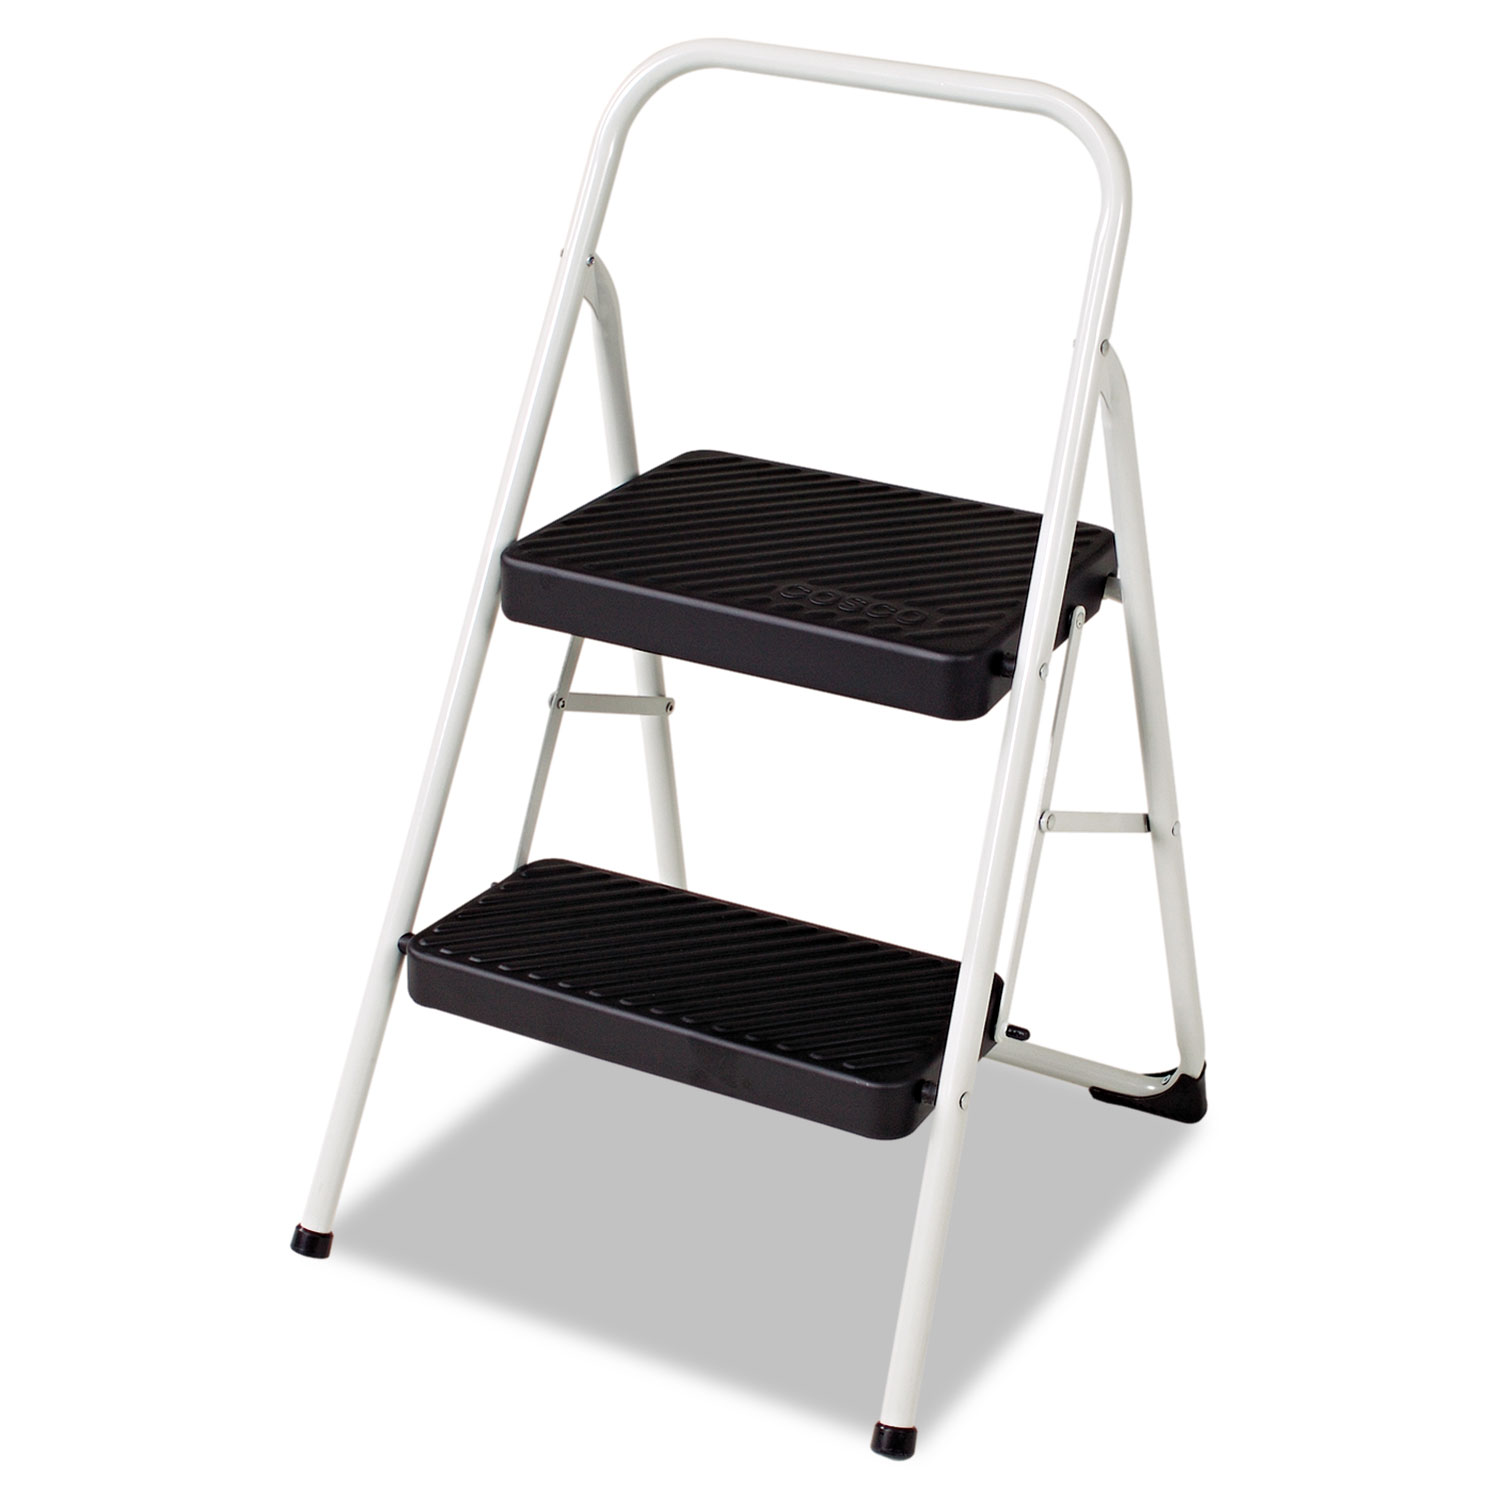  Cosco 11-135CLGG1 2-Step Folding Steel Step Stool, 200 lb Capacity, 17.38w x 18d x 28.13h, Cool Gray (CSC11135CLGG1) 